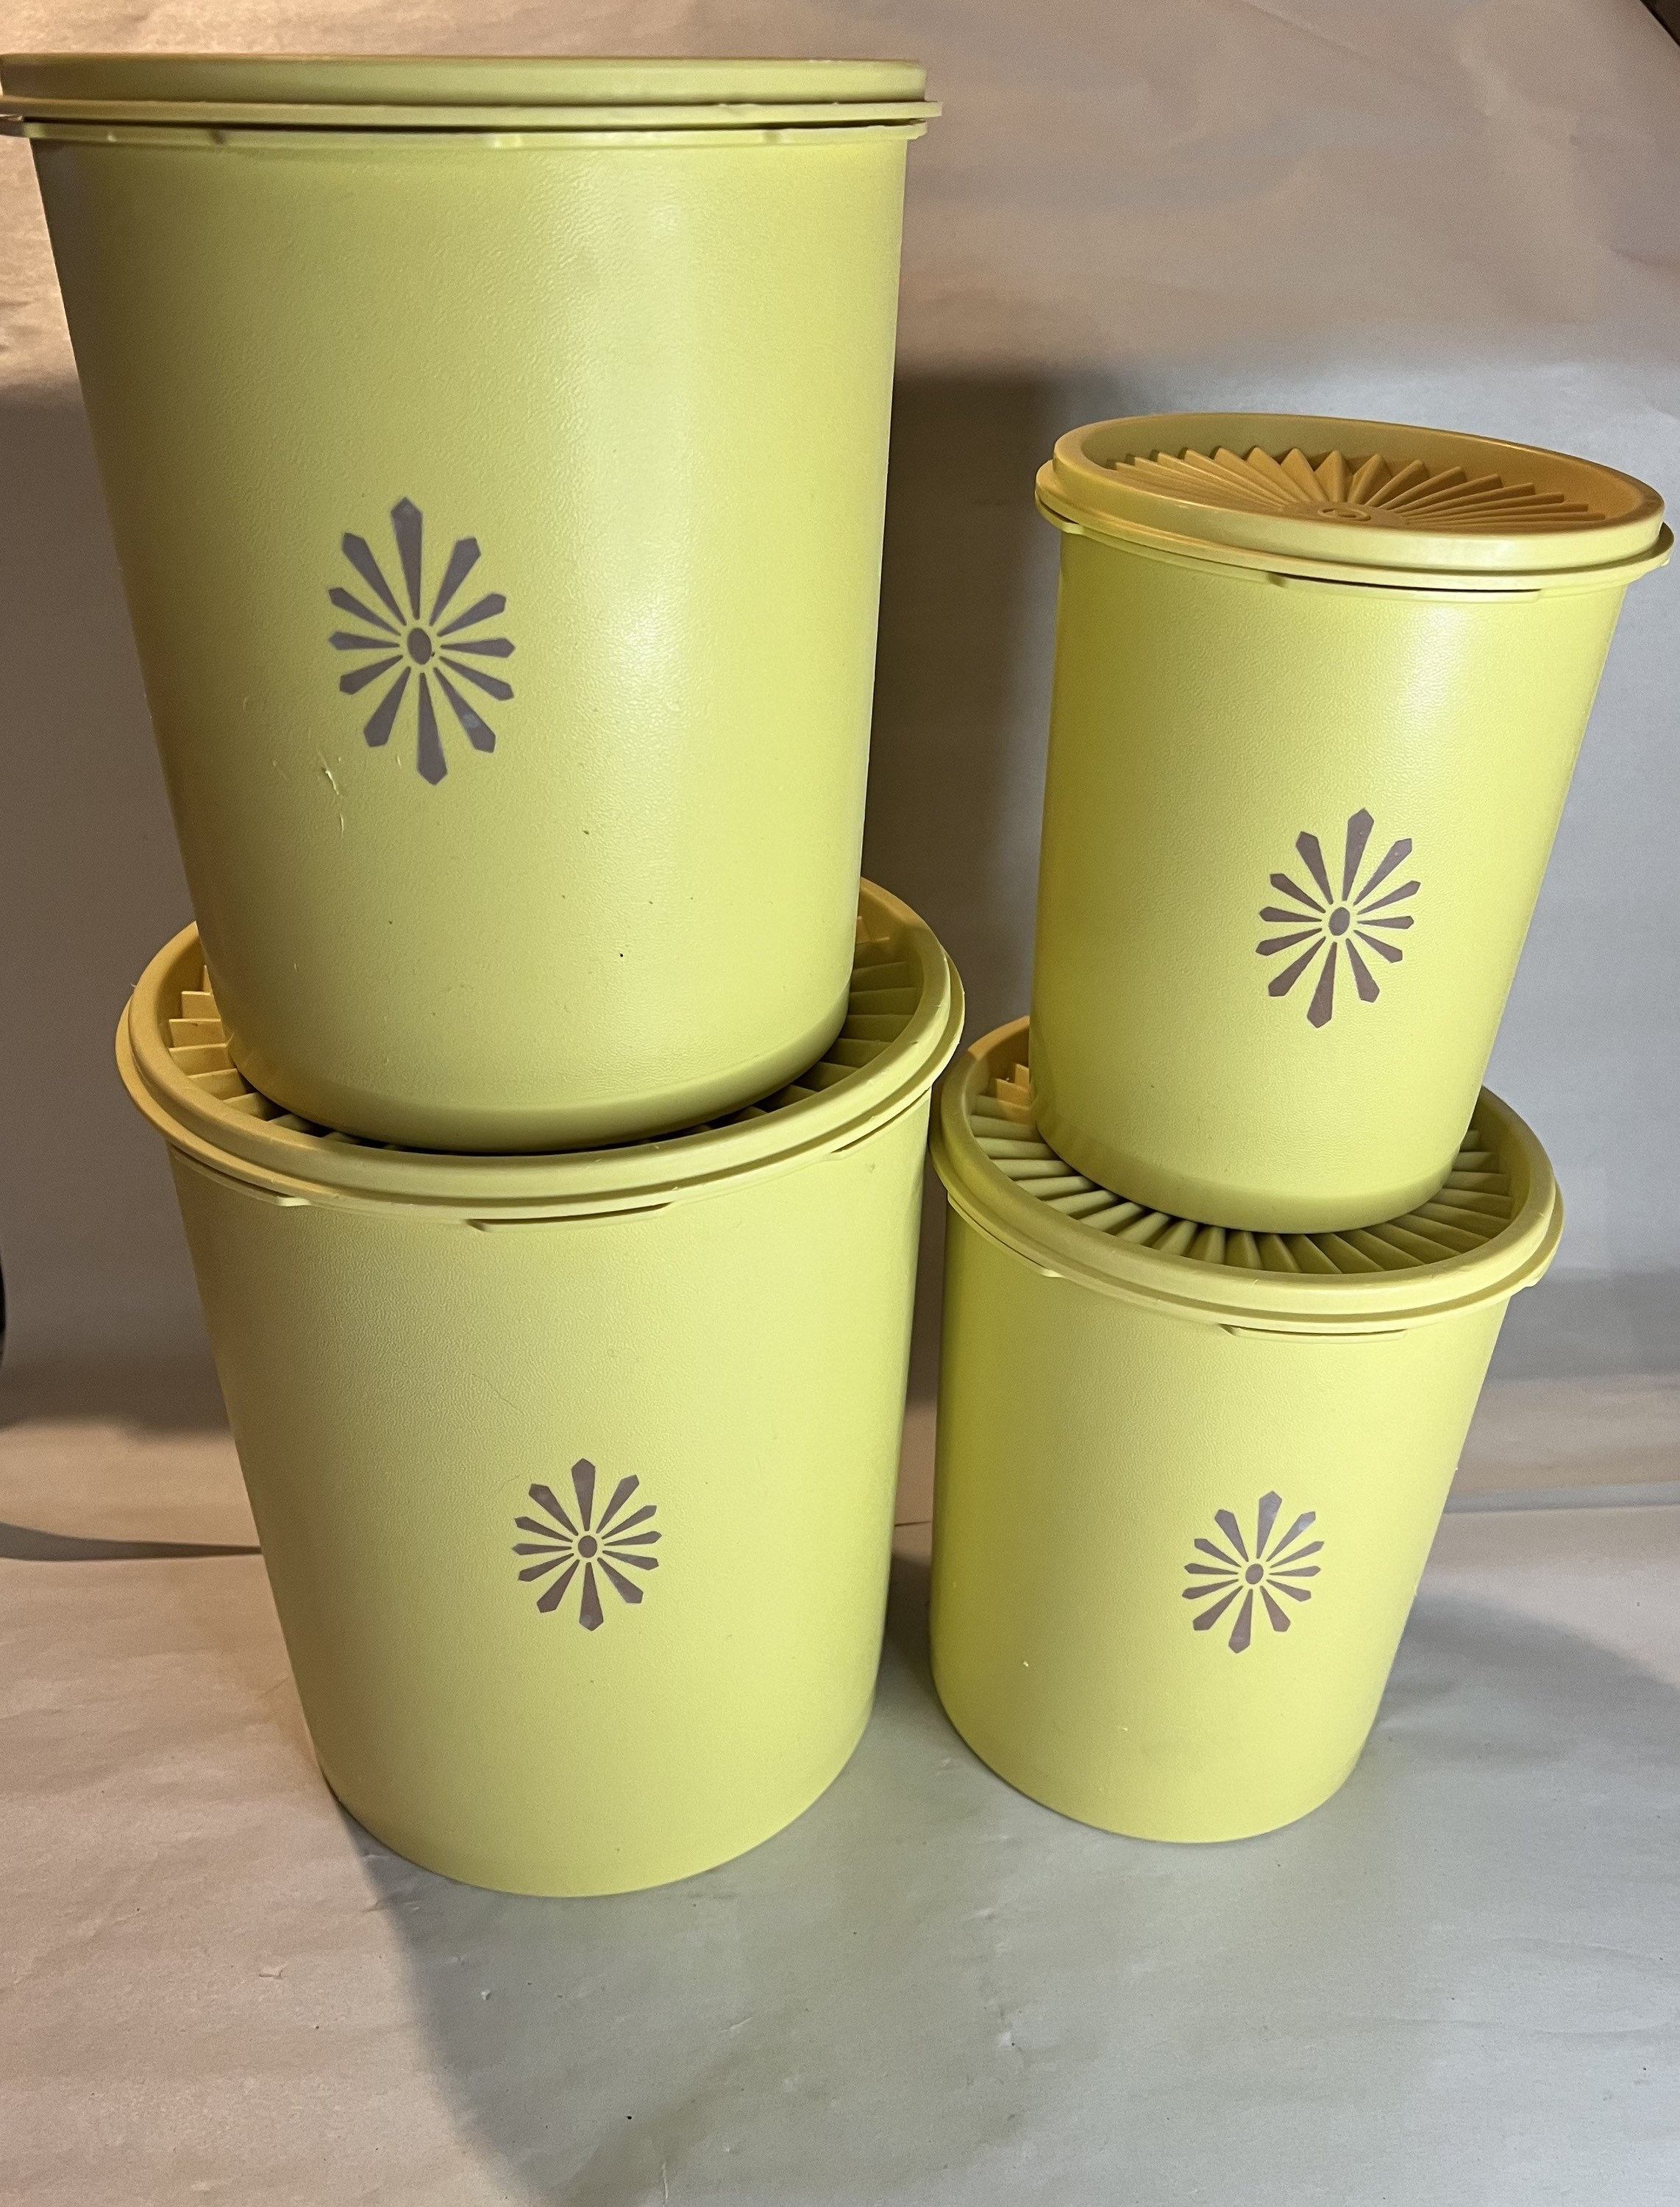 Vintage Tupperware Tangerine Servalier Canisters, Orange Tupperware, 8 cup  Canister, Set of 3 Storage Containers, Retro Tupperware, stacking